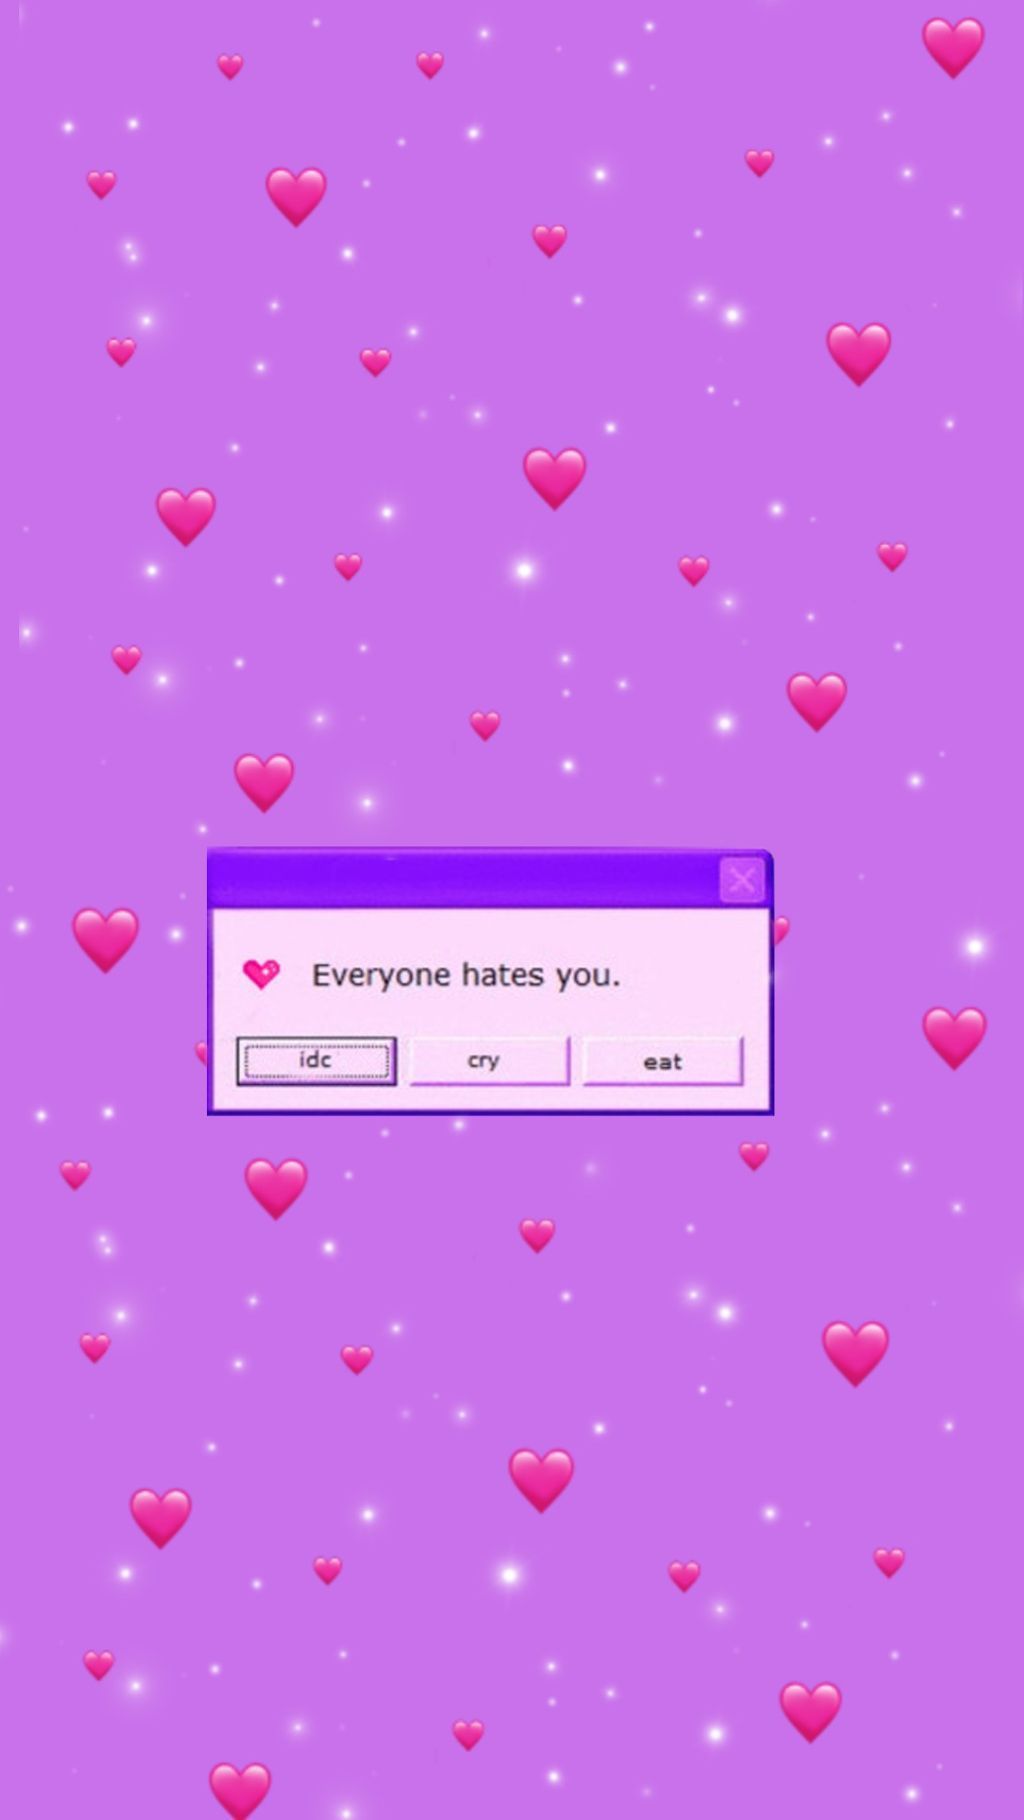 A computer screen with hearts on it - Cute, bisexual, cute purple, pretty